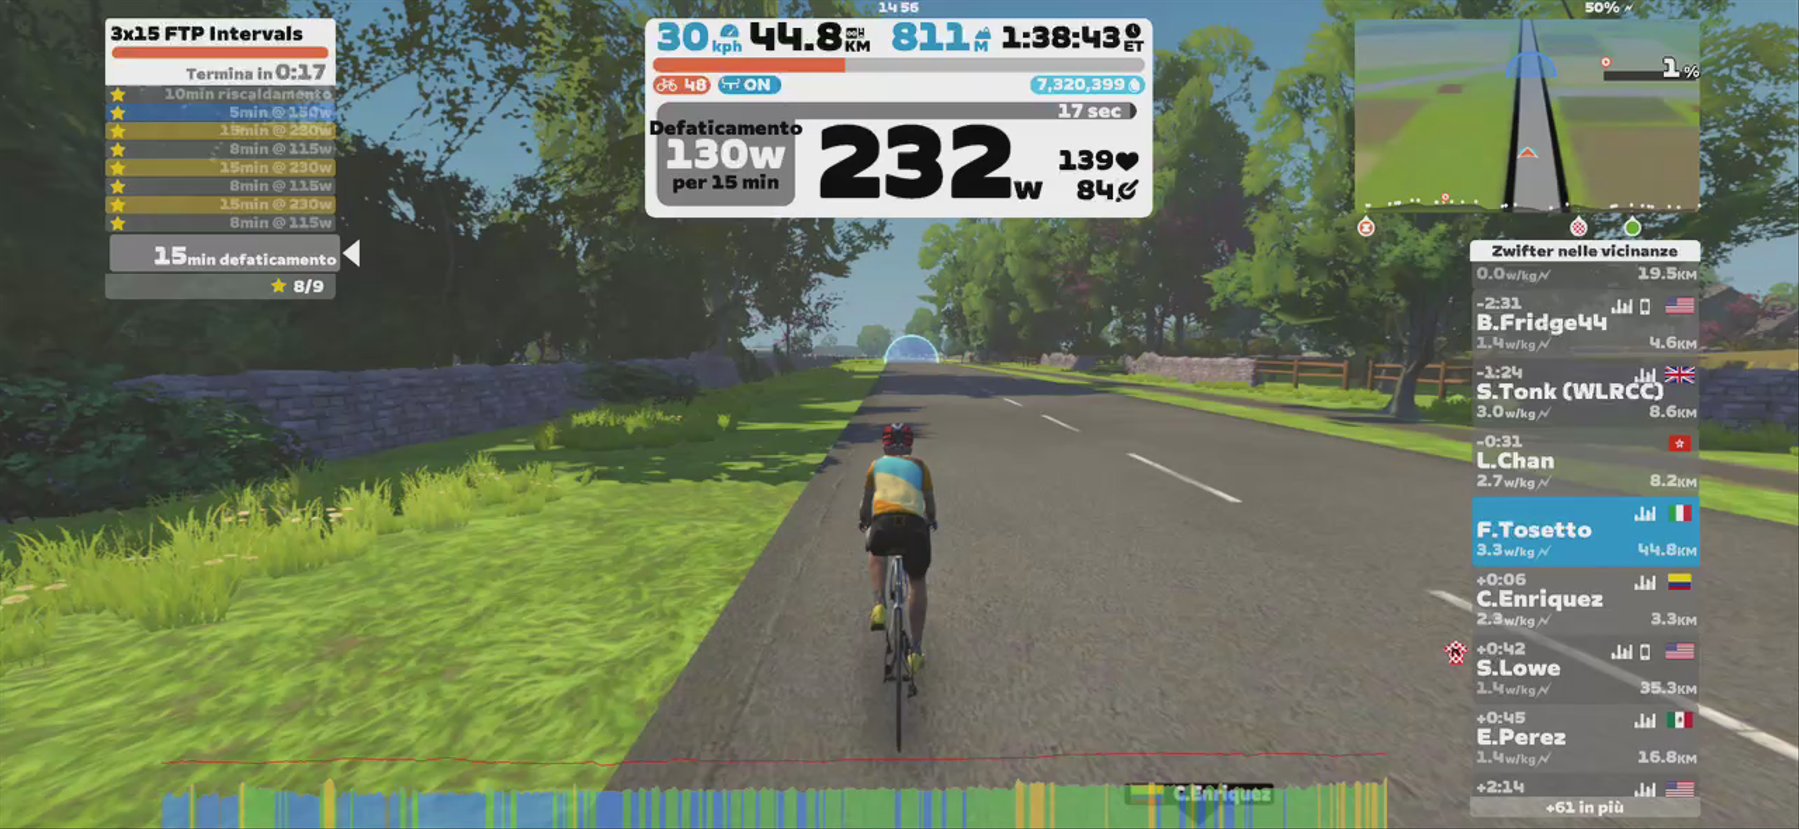 Zwift - 3x15 FTP Intervals on Downtown Dolphin in Yorkshire